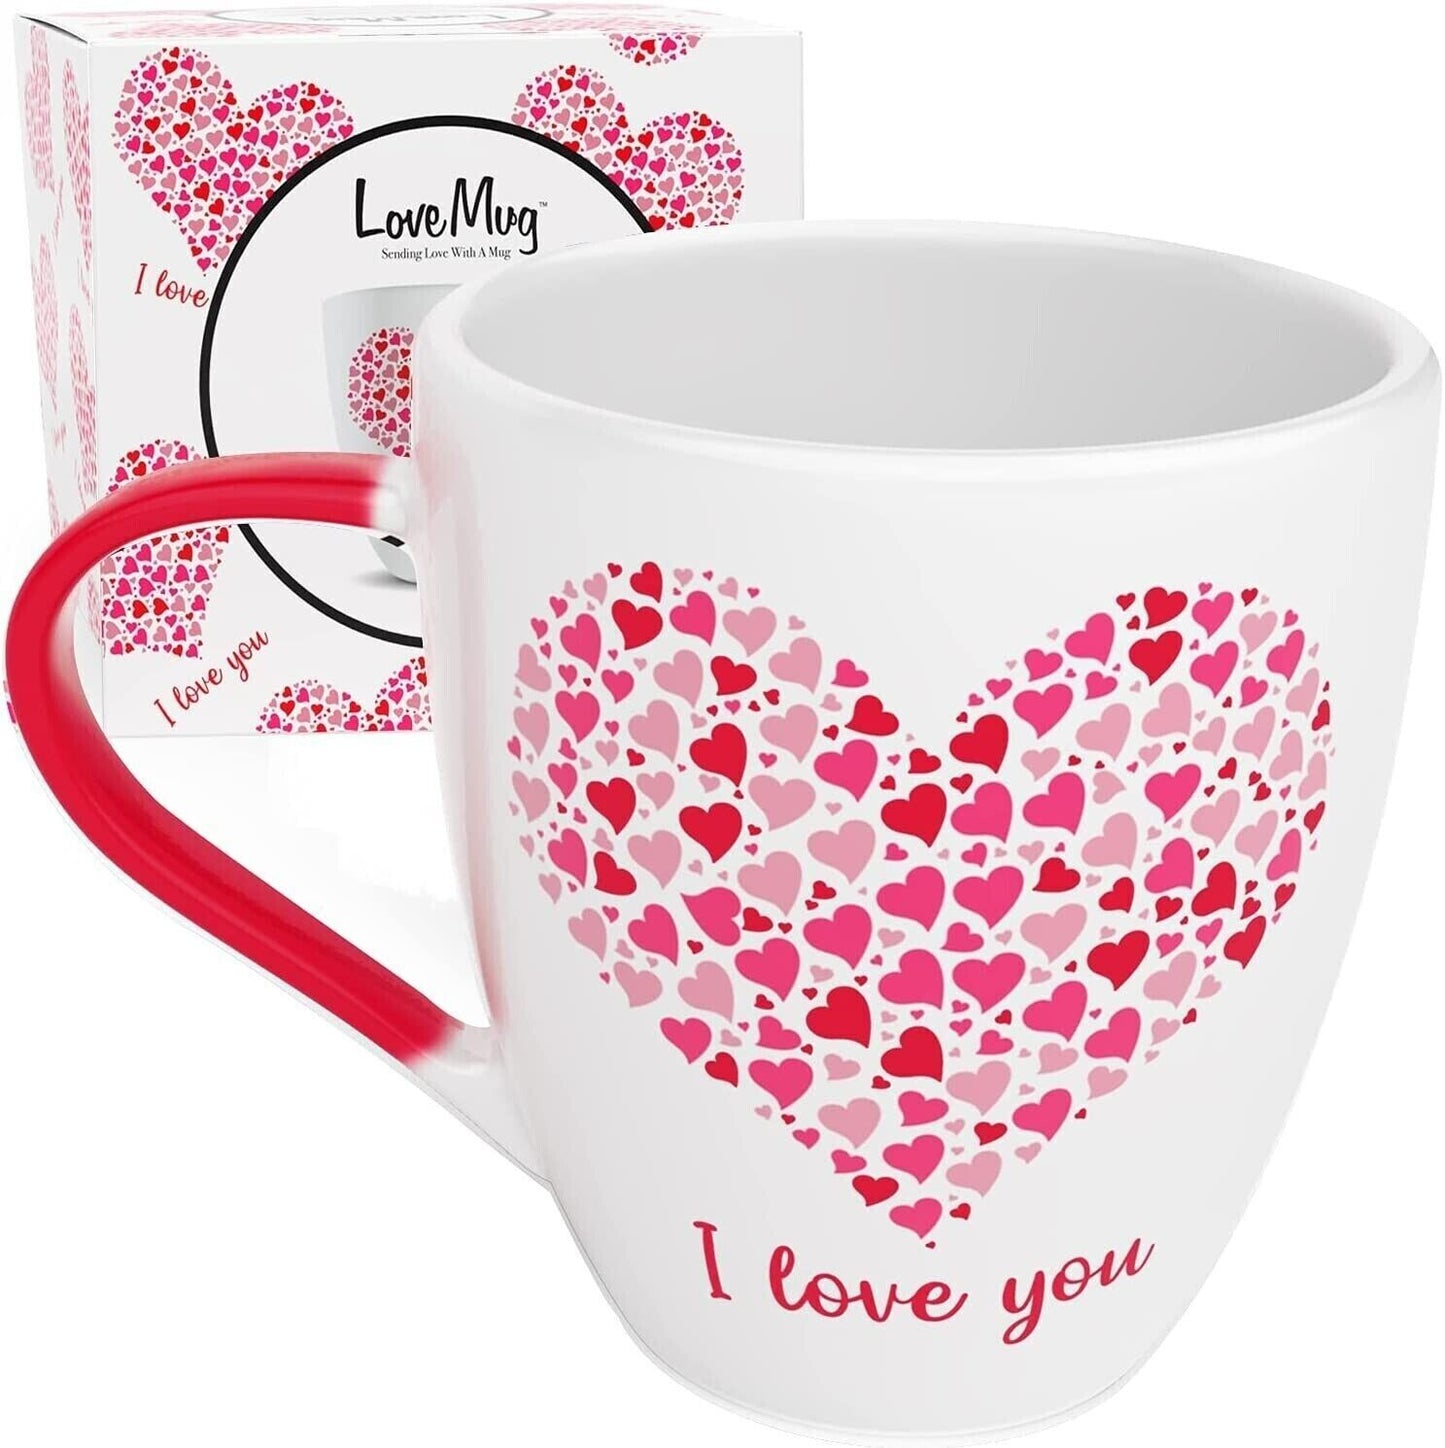 Love Mug: I Love You Mug - Romantic Gifts for Her and Him, I Love You Gifts for Her, I Love You Gifts for Him, Boyfriend Gifts, Wife Coffee Cup, Wife Gifts, Husband Gifts, Girlfriend Gifts